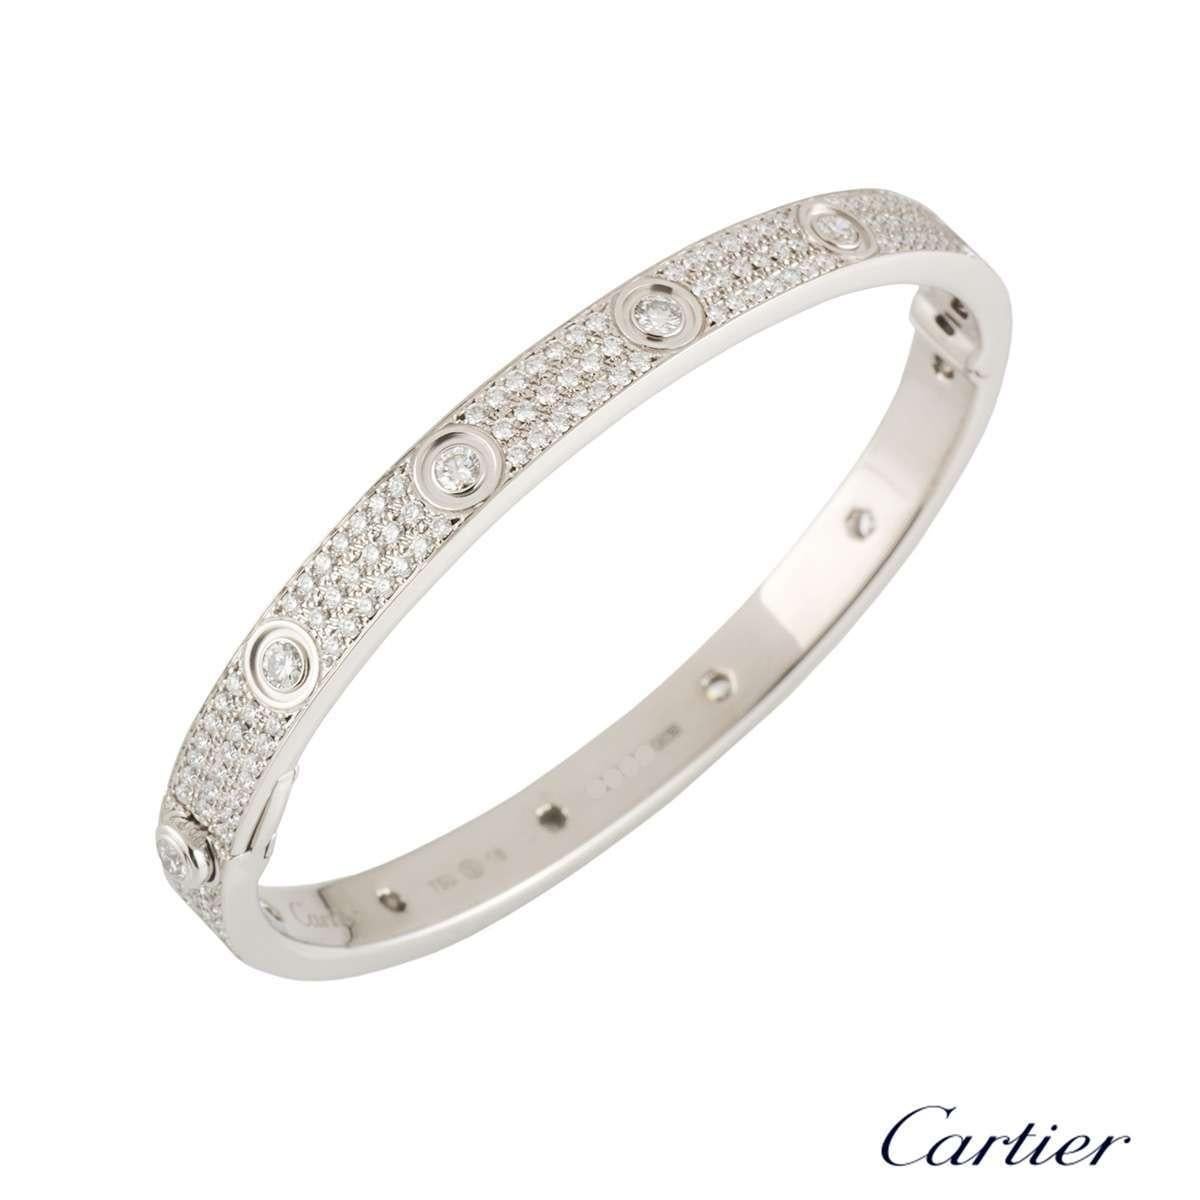 Brilliant Cut Cartier LOVE Bracelet in 18k white gold and 3.70ct diamonds with box